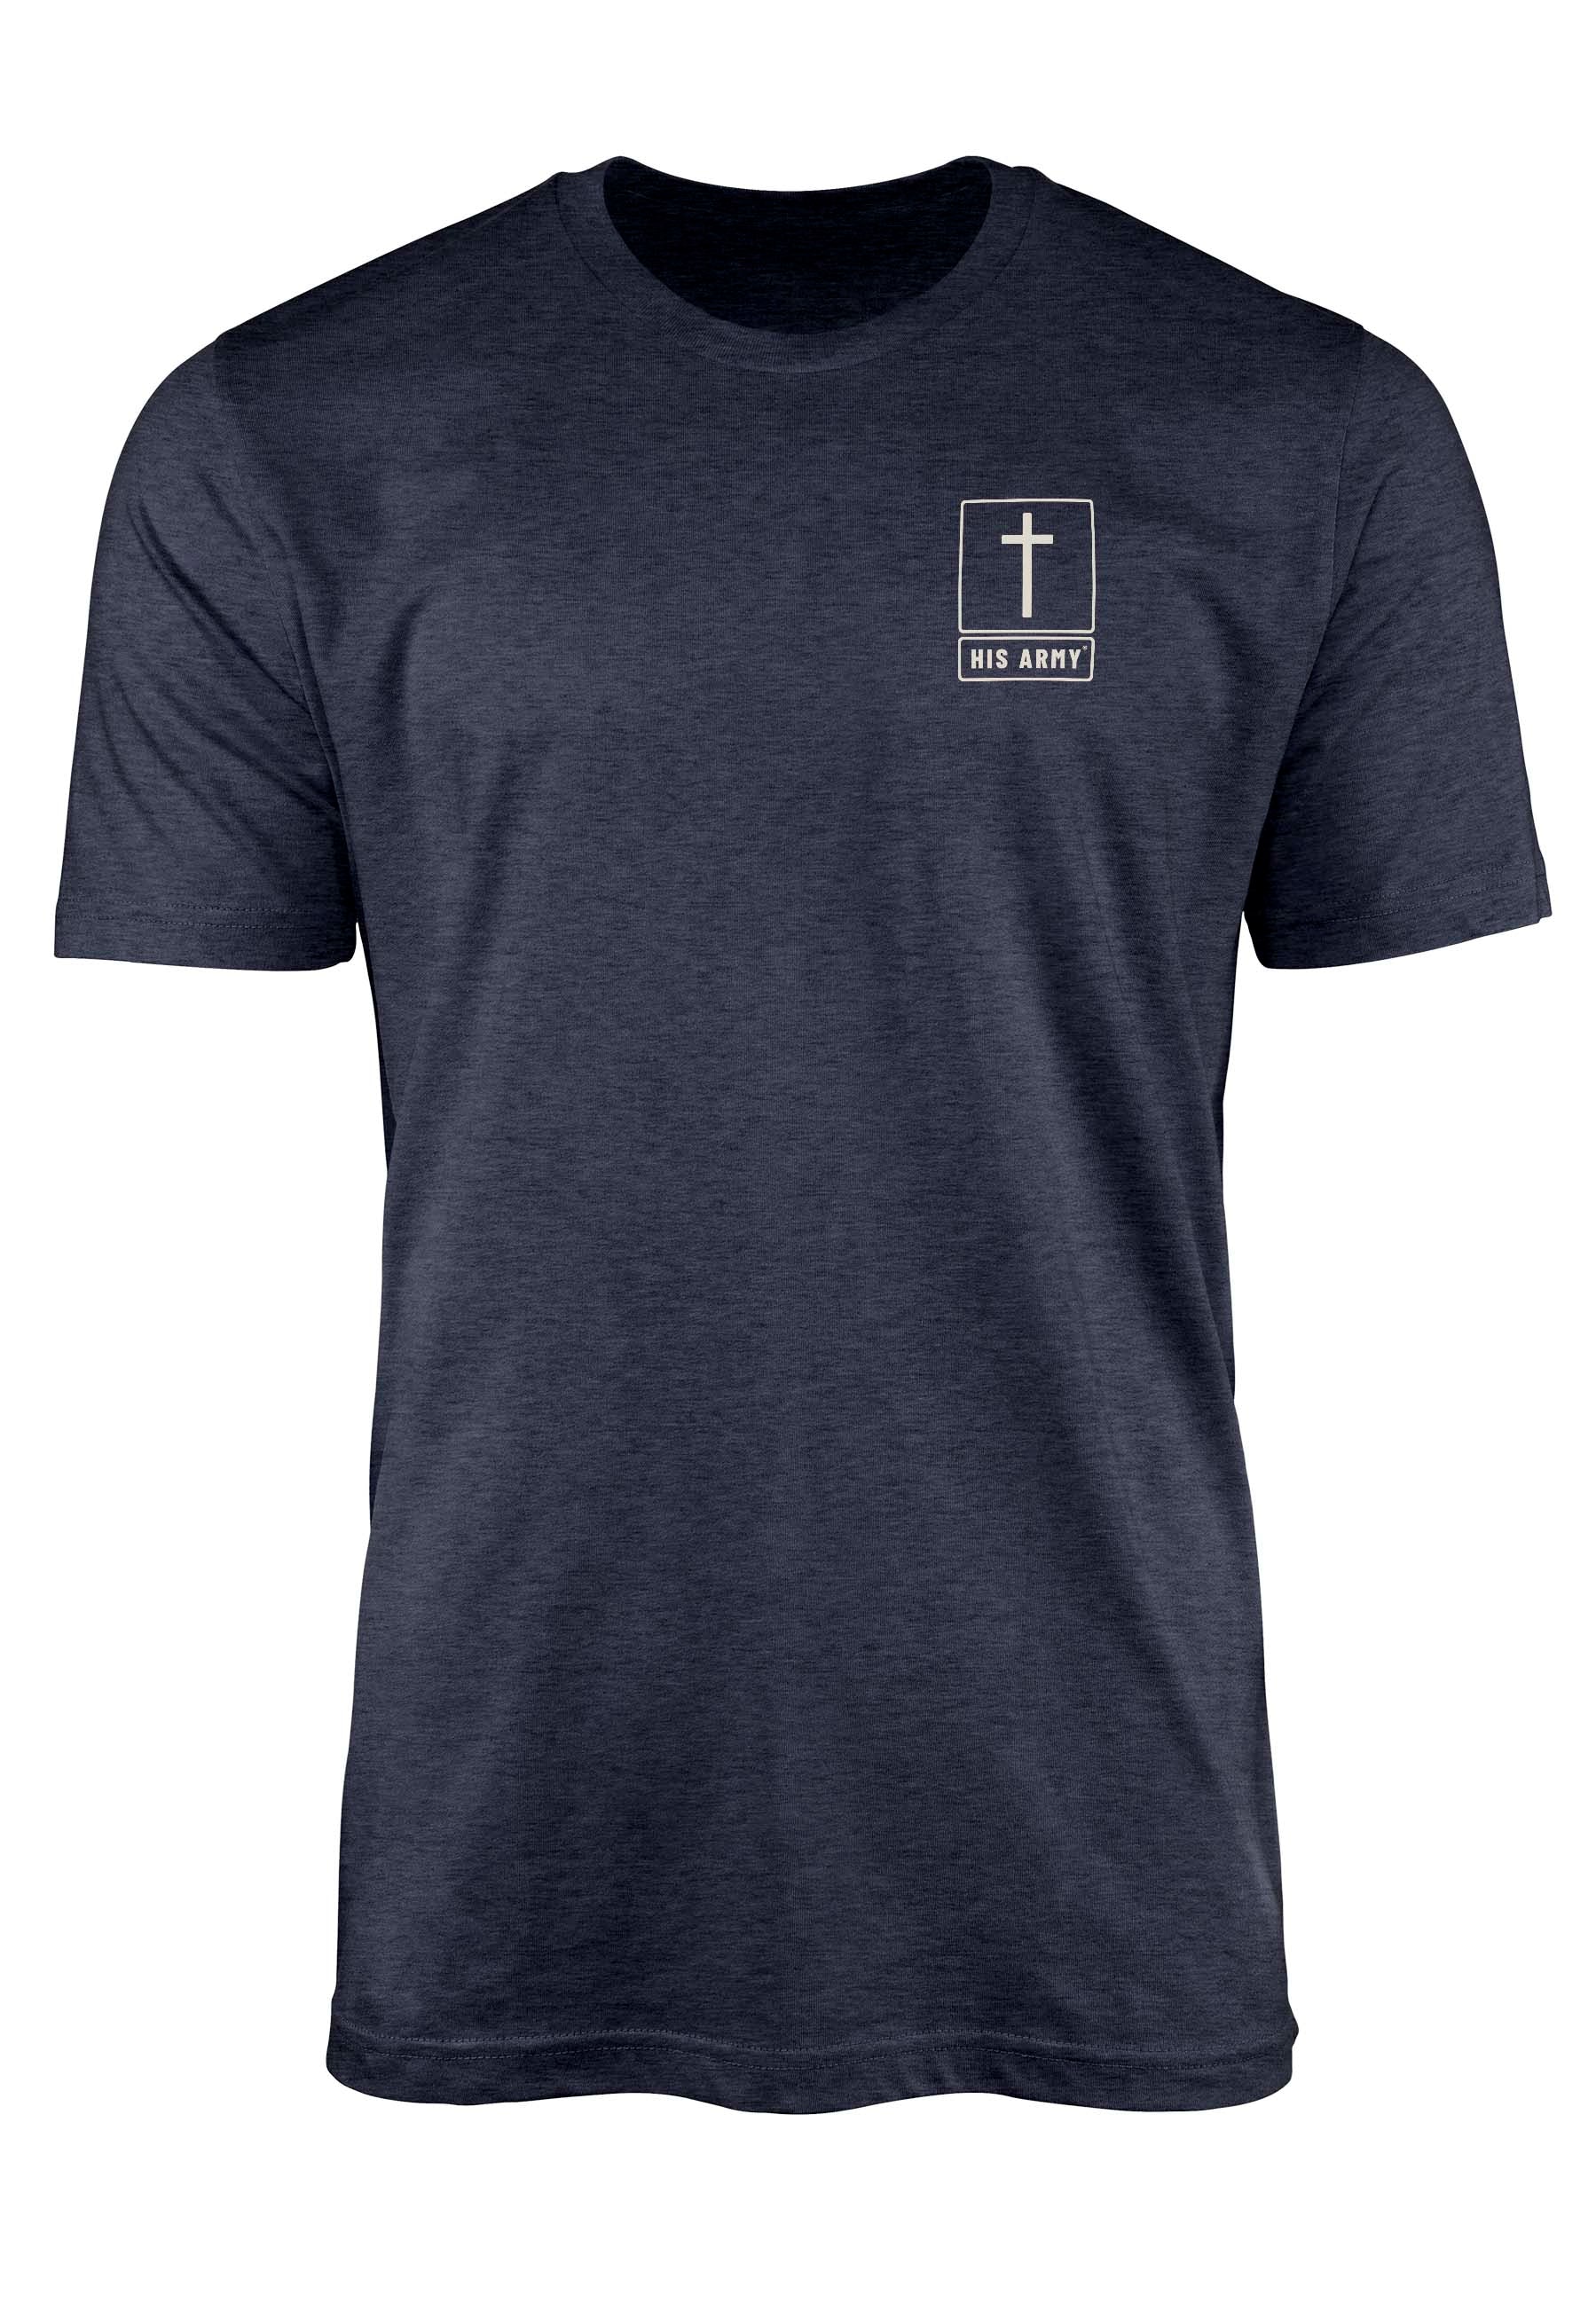 Christian Dad t-shirt chest print from His Army® brand